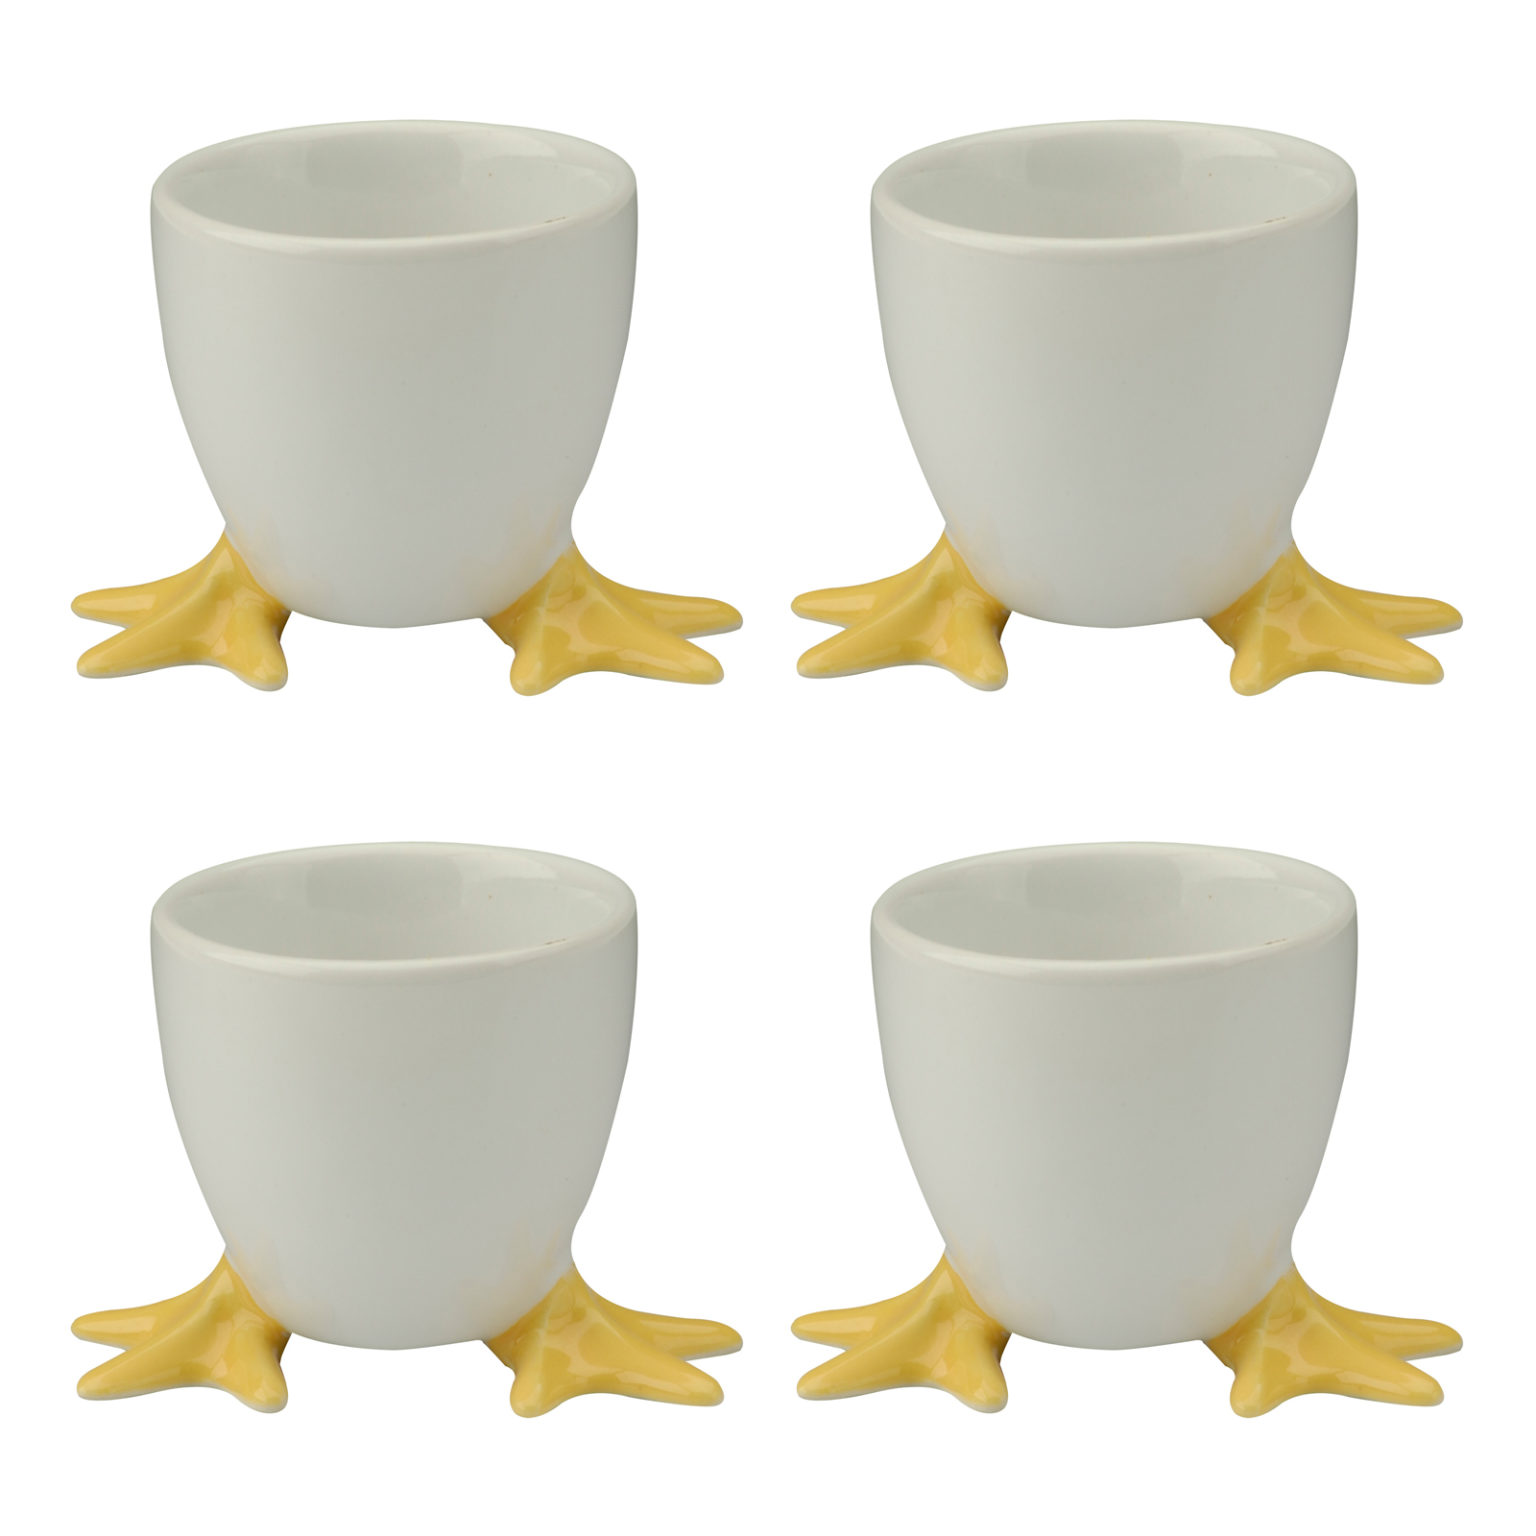 Set Of 4 Chicken Feet Egg Cups With Yellow Feet The Drh Collection